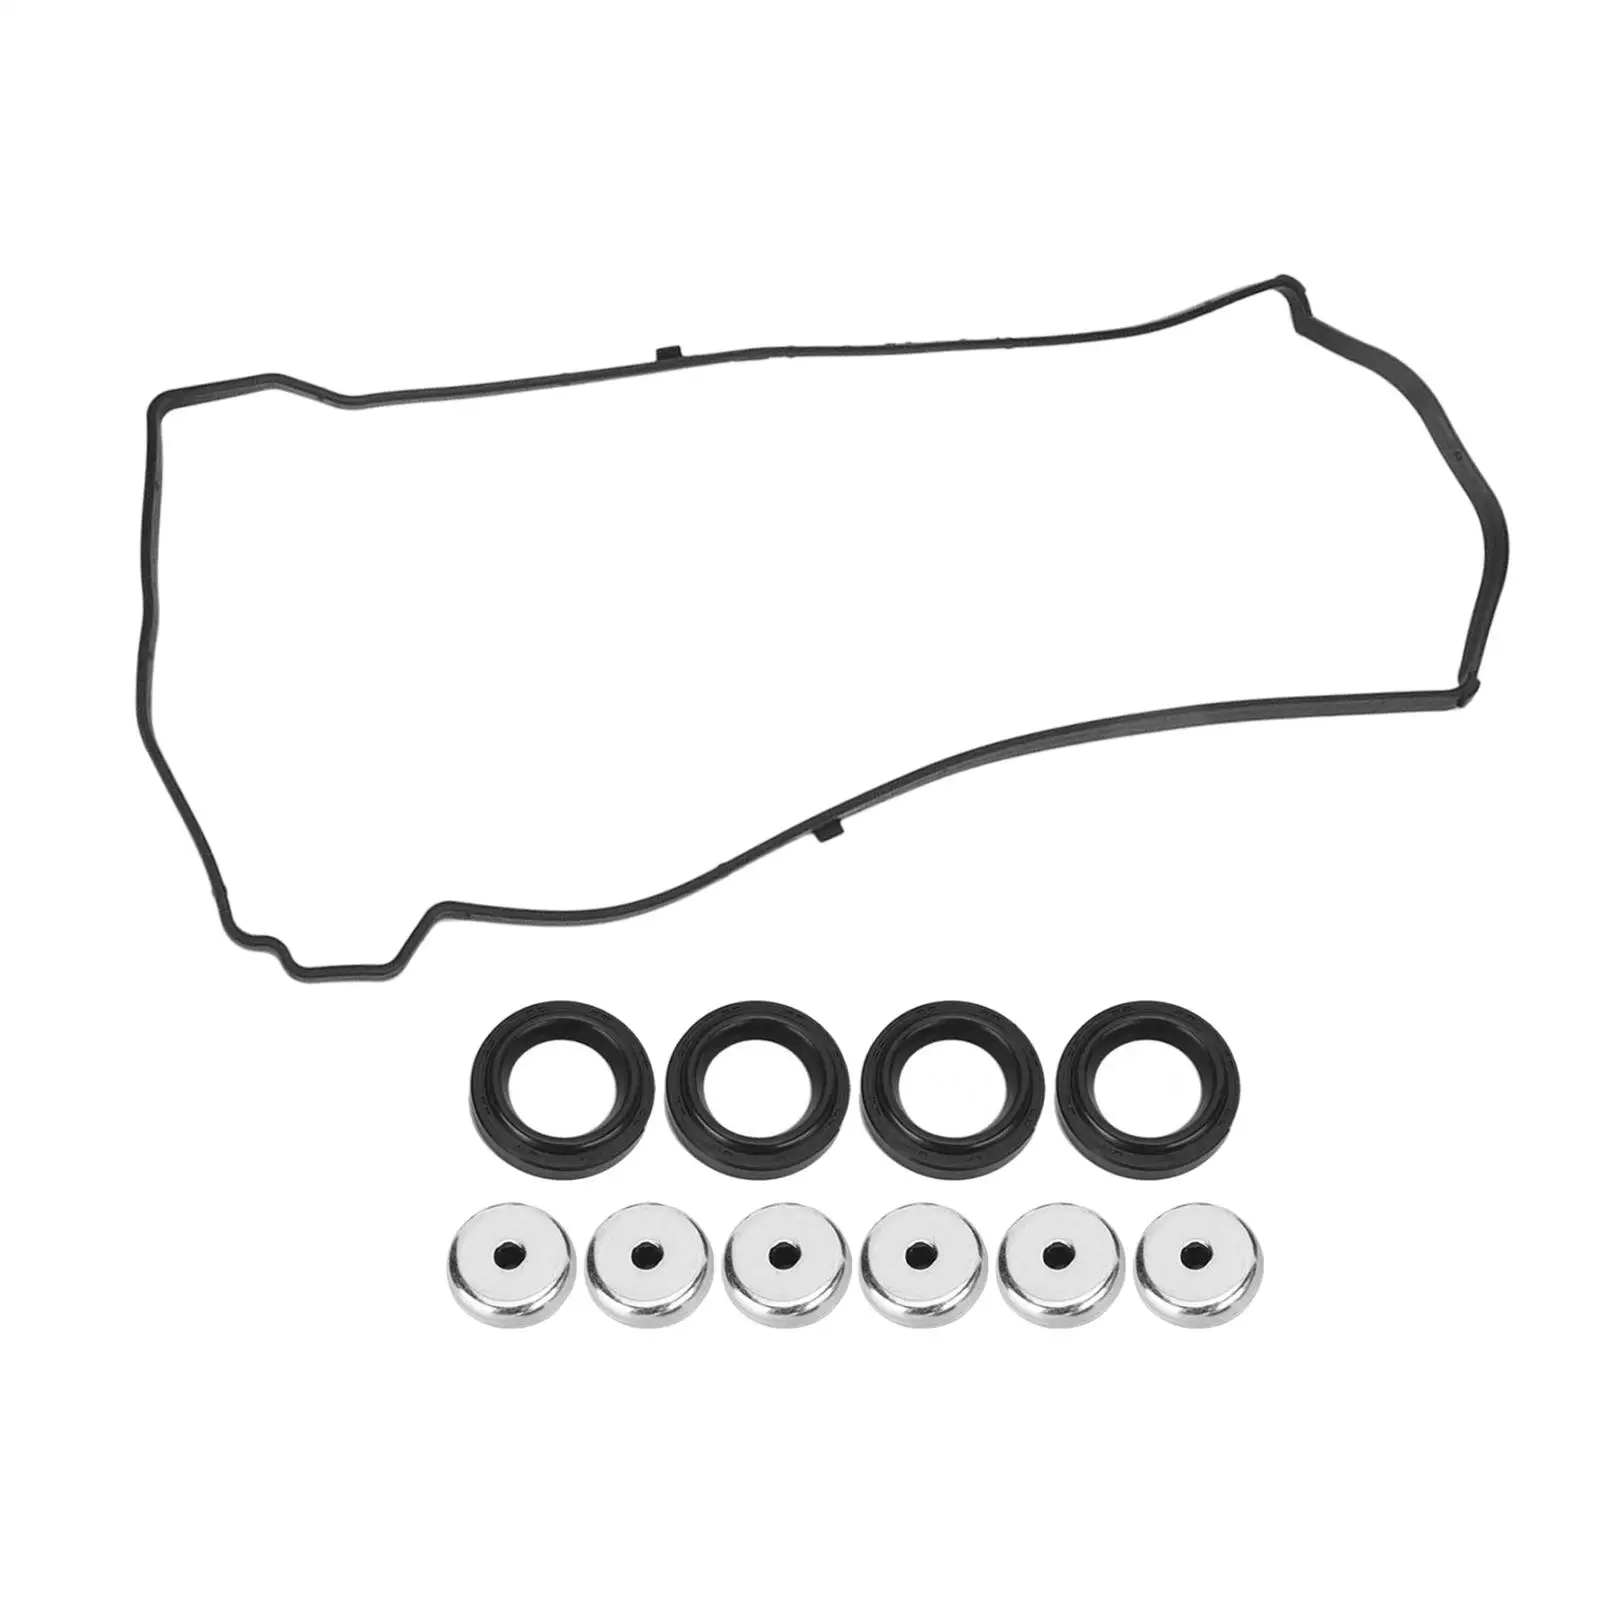 Valve Cover Gasket Seal 12030-pnc-000 Spare Parts Direct Replaces Car Accessories for Honda Acura RSX Tsx K20 K24 CRV